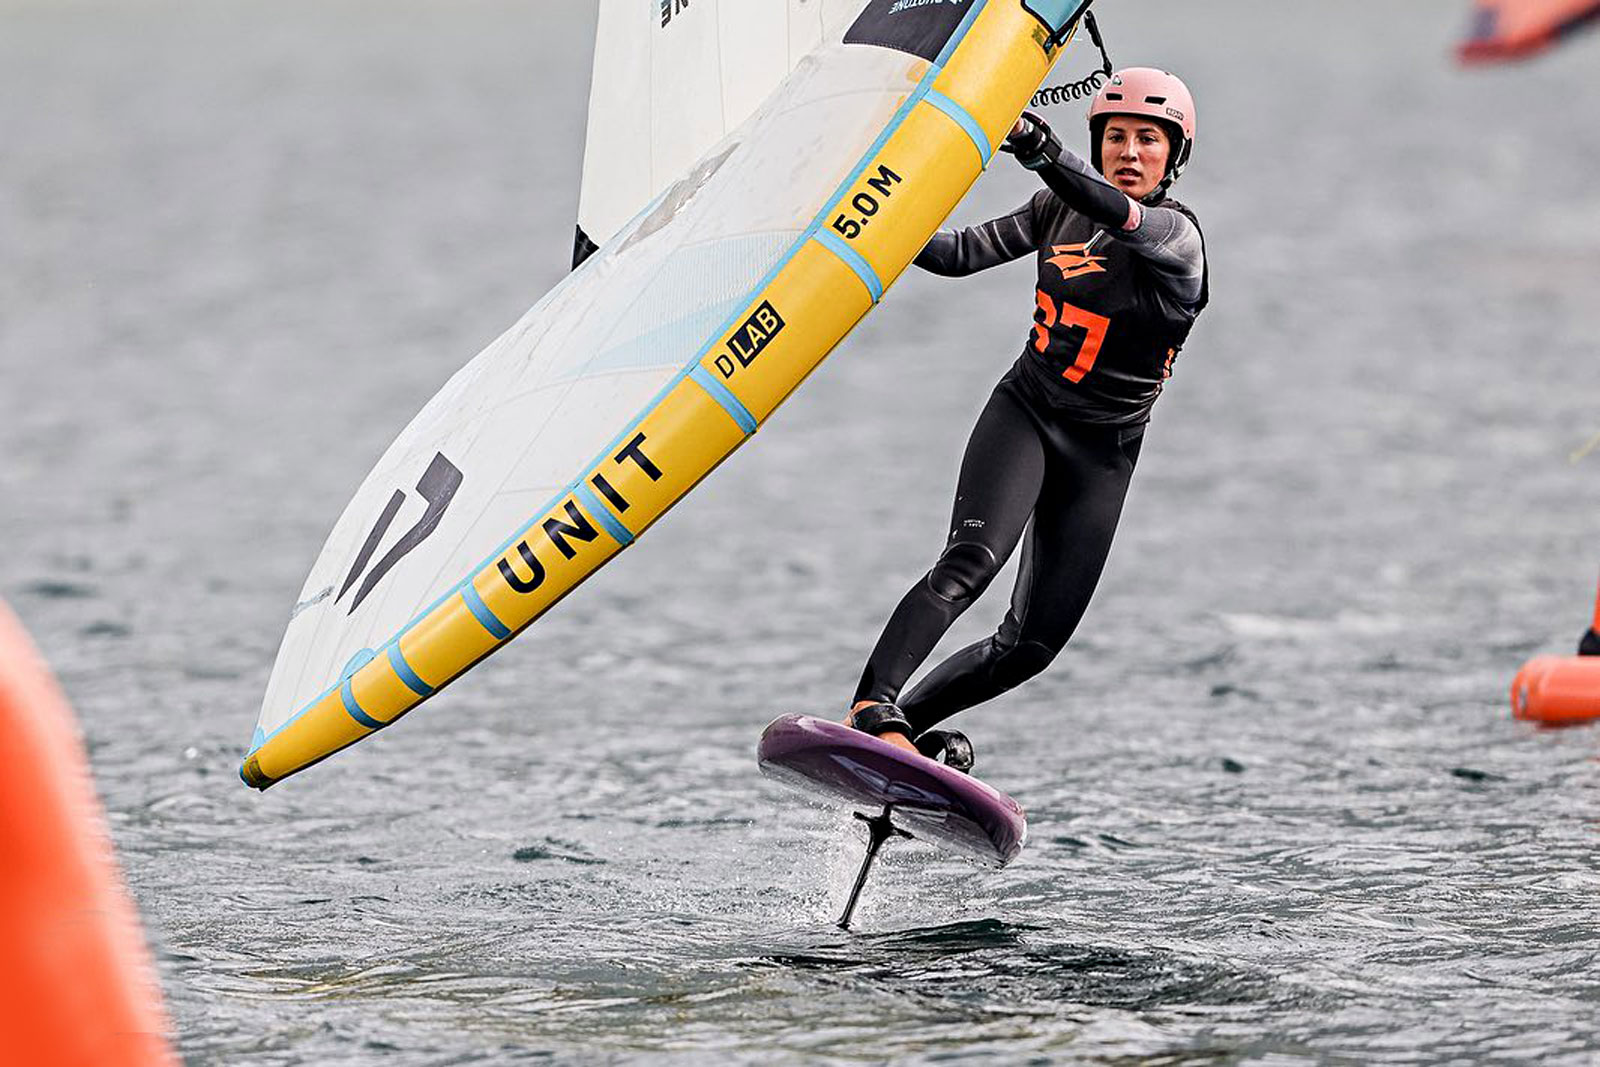 Ensis Engadinwing by Dakine GWA Wingfoil World Cup: Tag 2